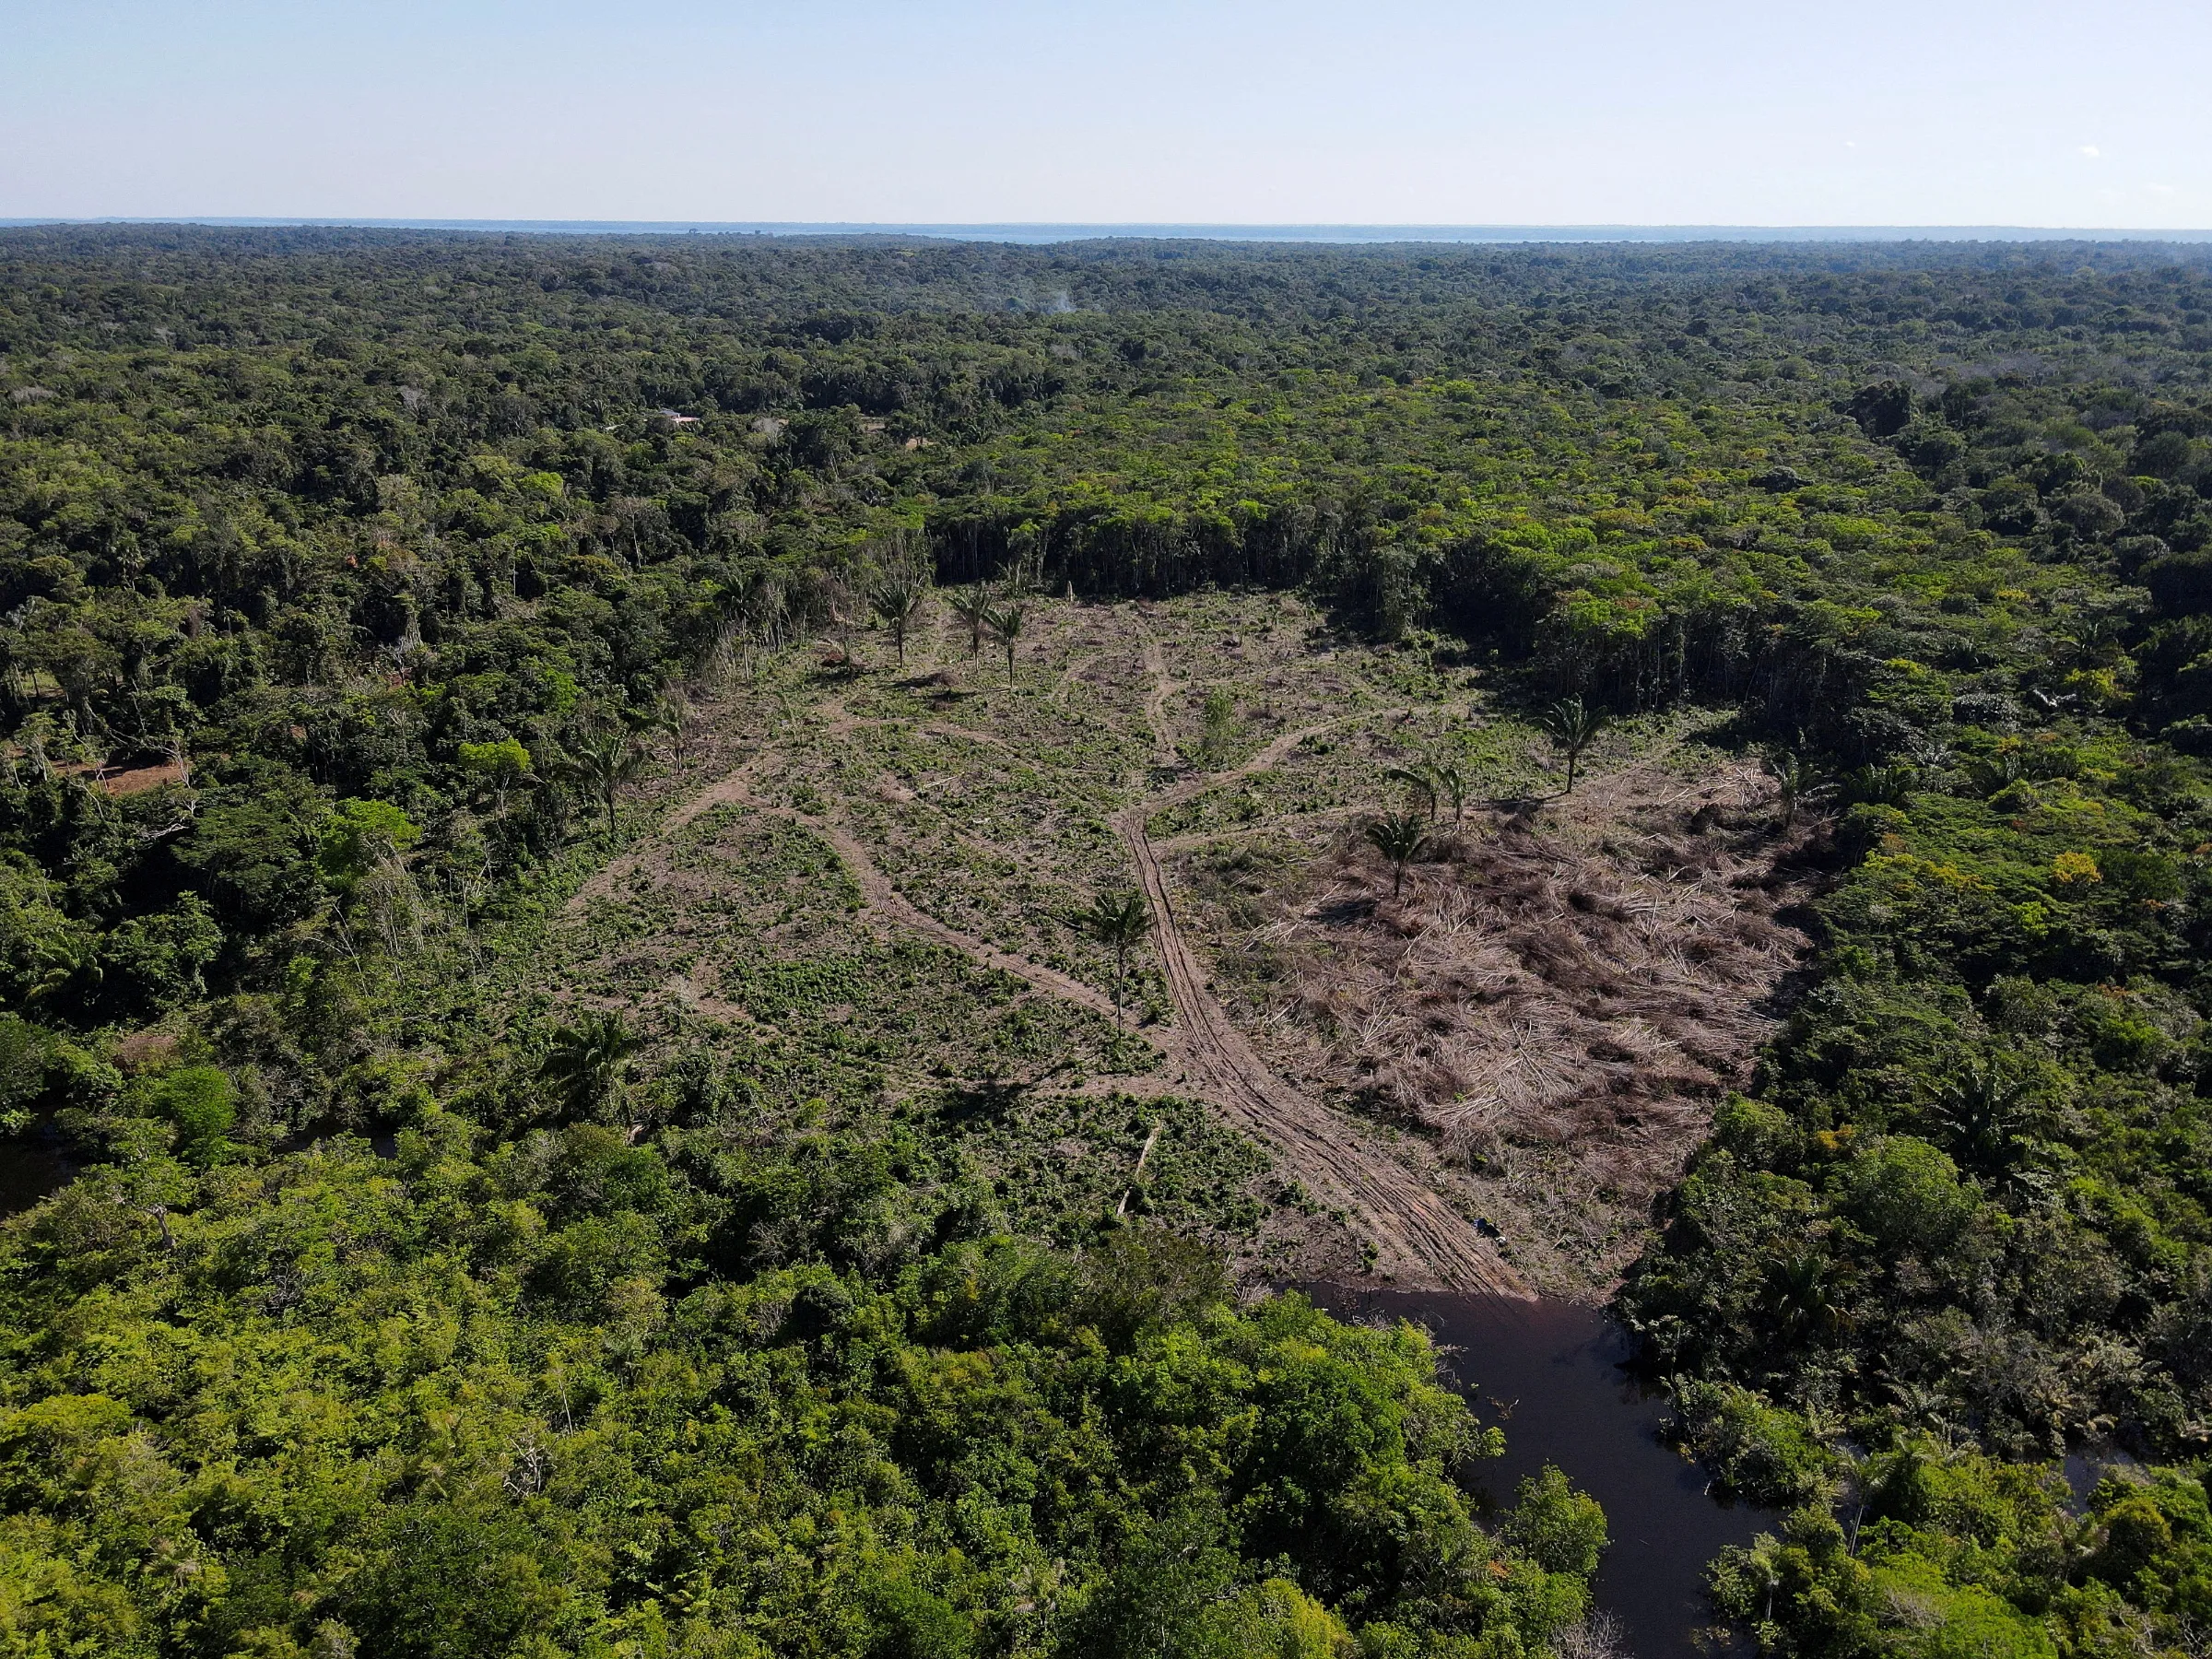 An aerial view shows a deforested plot of the Amazon rainforest in Manaus, Amazonas State, Brazil July 8, 2022. REUTERS/Bruno Kelly